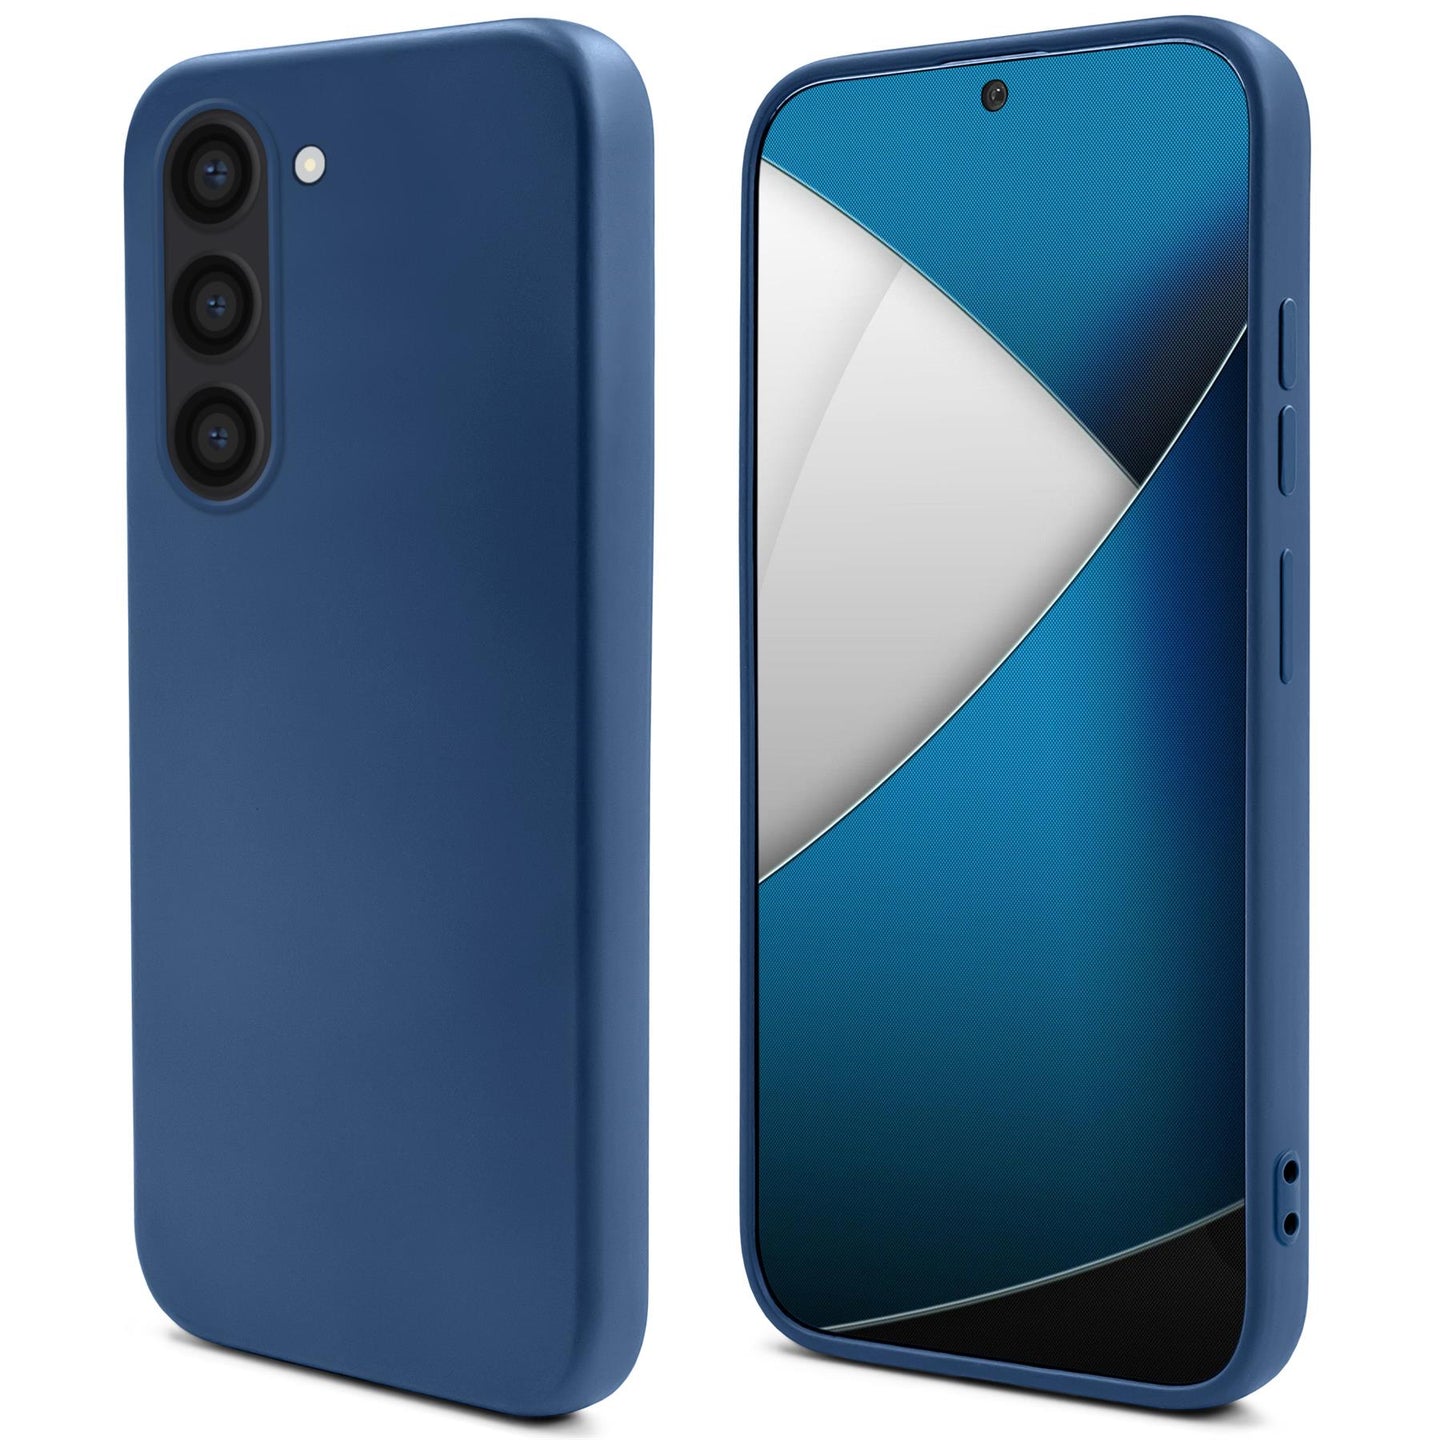 Moozy Lifestyle. Silicone Case for Samsung S23, Midnight Blue - Liquid Silicone Lightweight Cover with Matte Finish and Soft Microfiber Lining, Premium Silicone Case